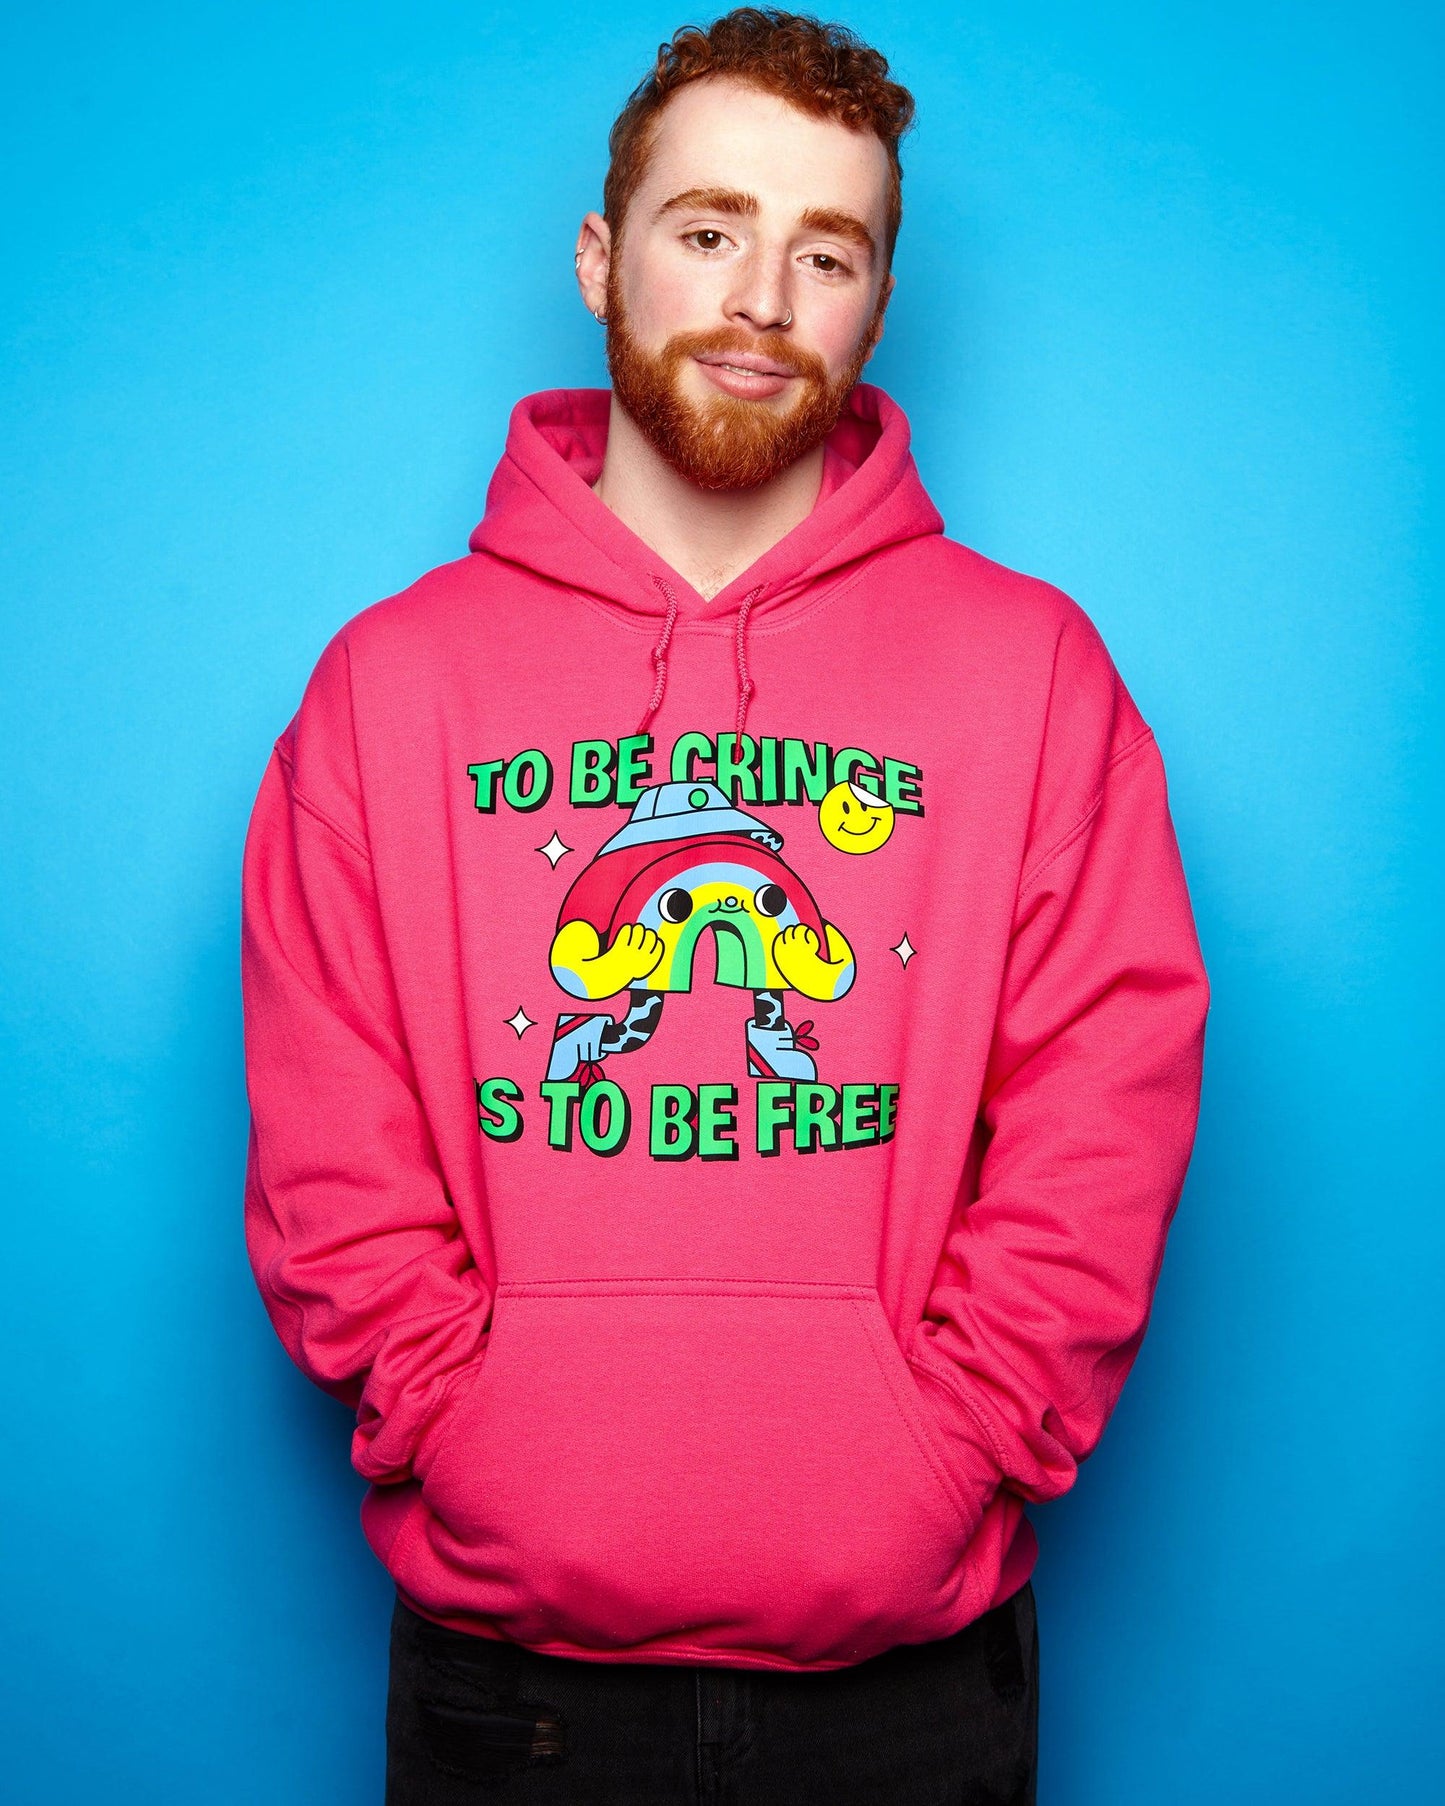 To be cringe is to be free, fuchsia pullover hoodie.